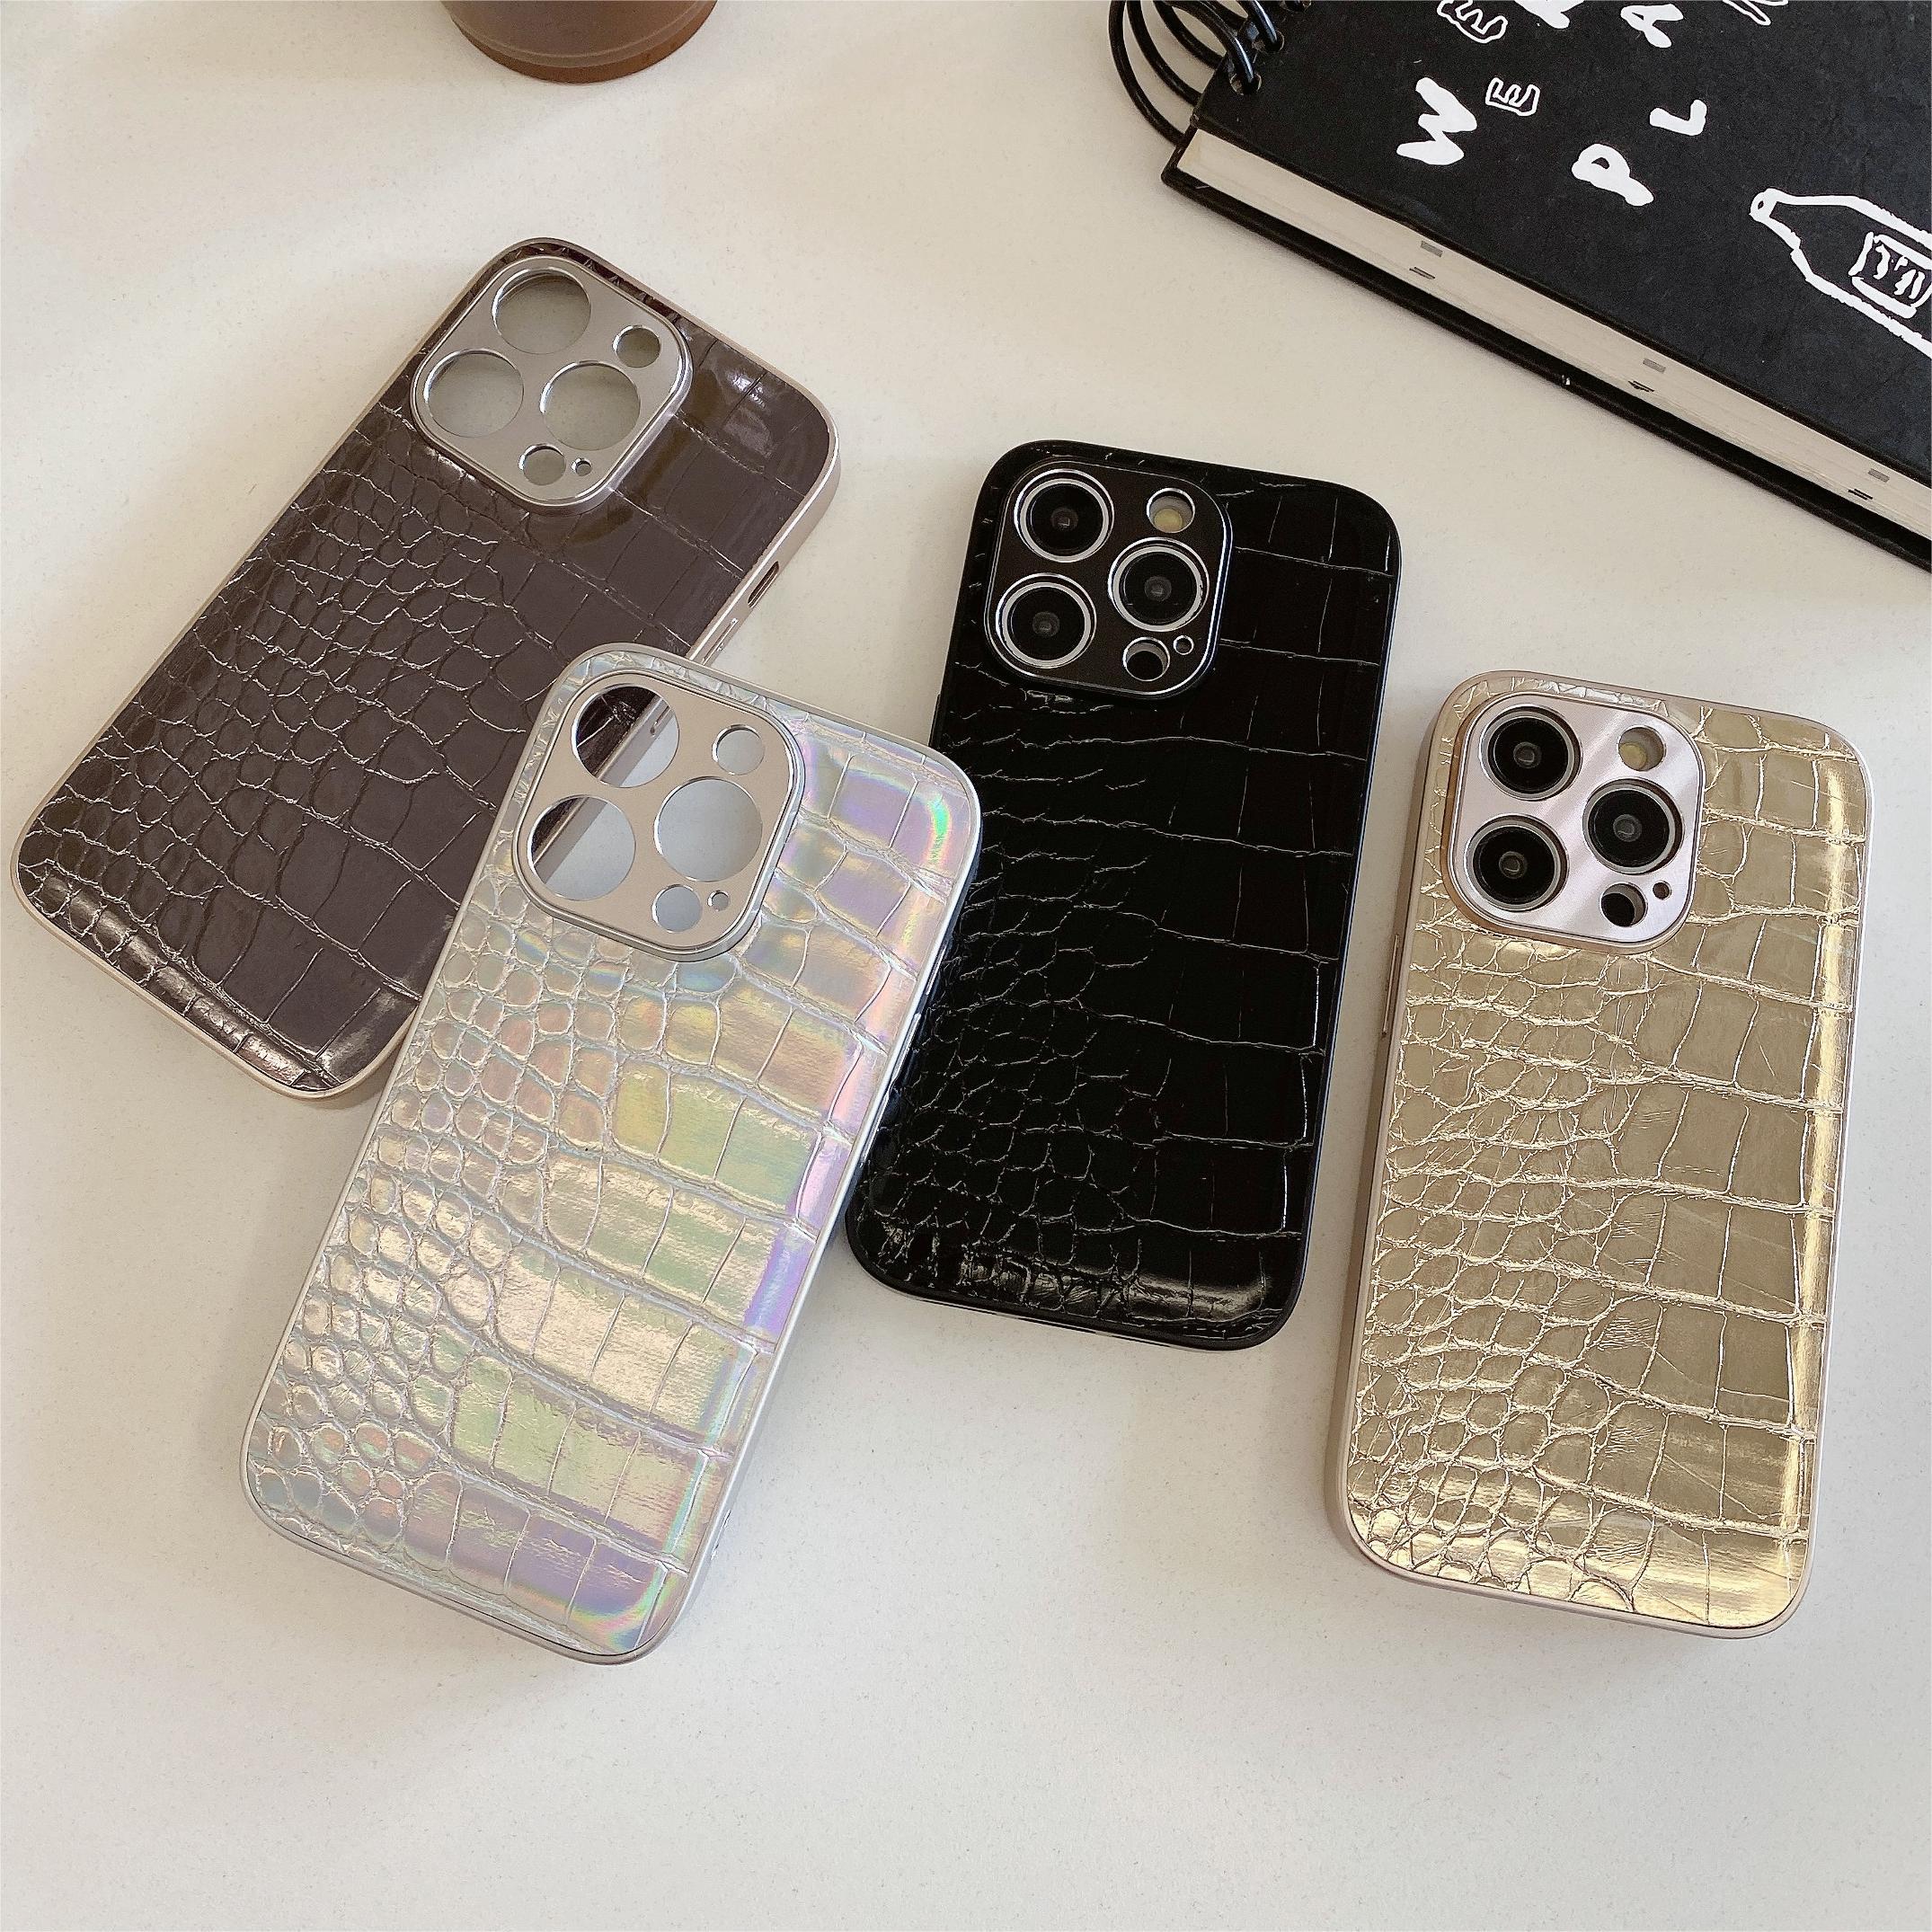 

Crocodile Pattern Tpu Phone Cases - Shockproof Full Body Protective Covers For Iphone X/xs/xr/11/12/13/14/15 Pro Max Plus Series